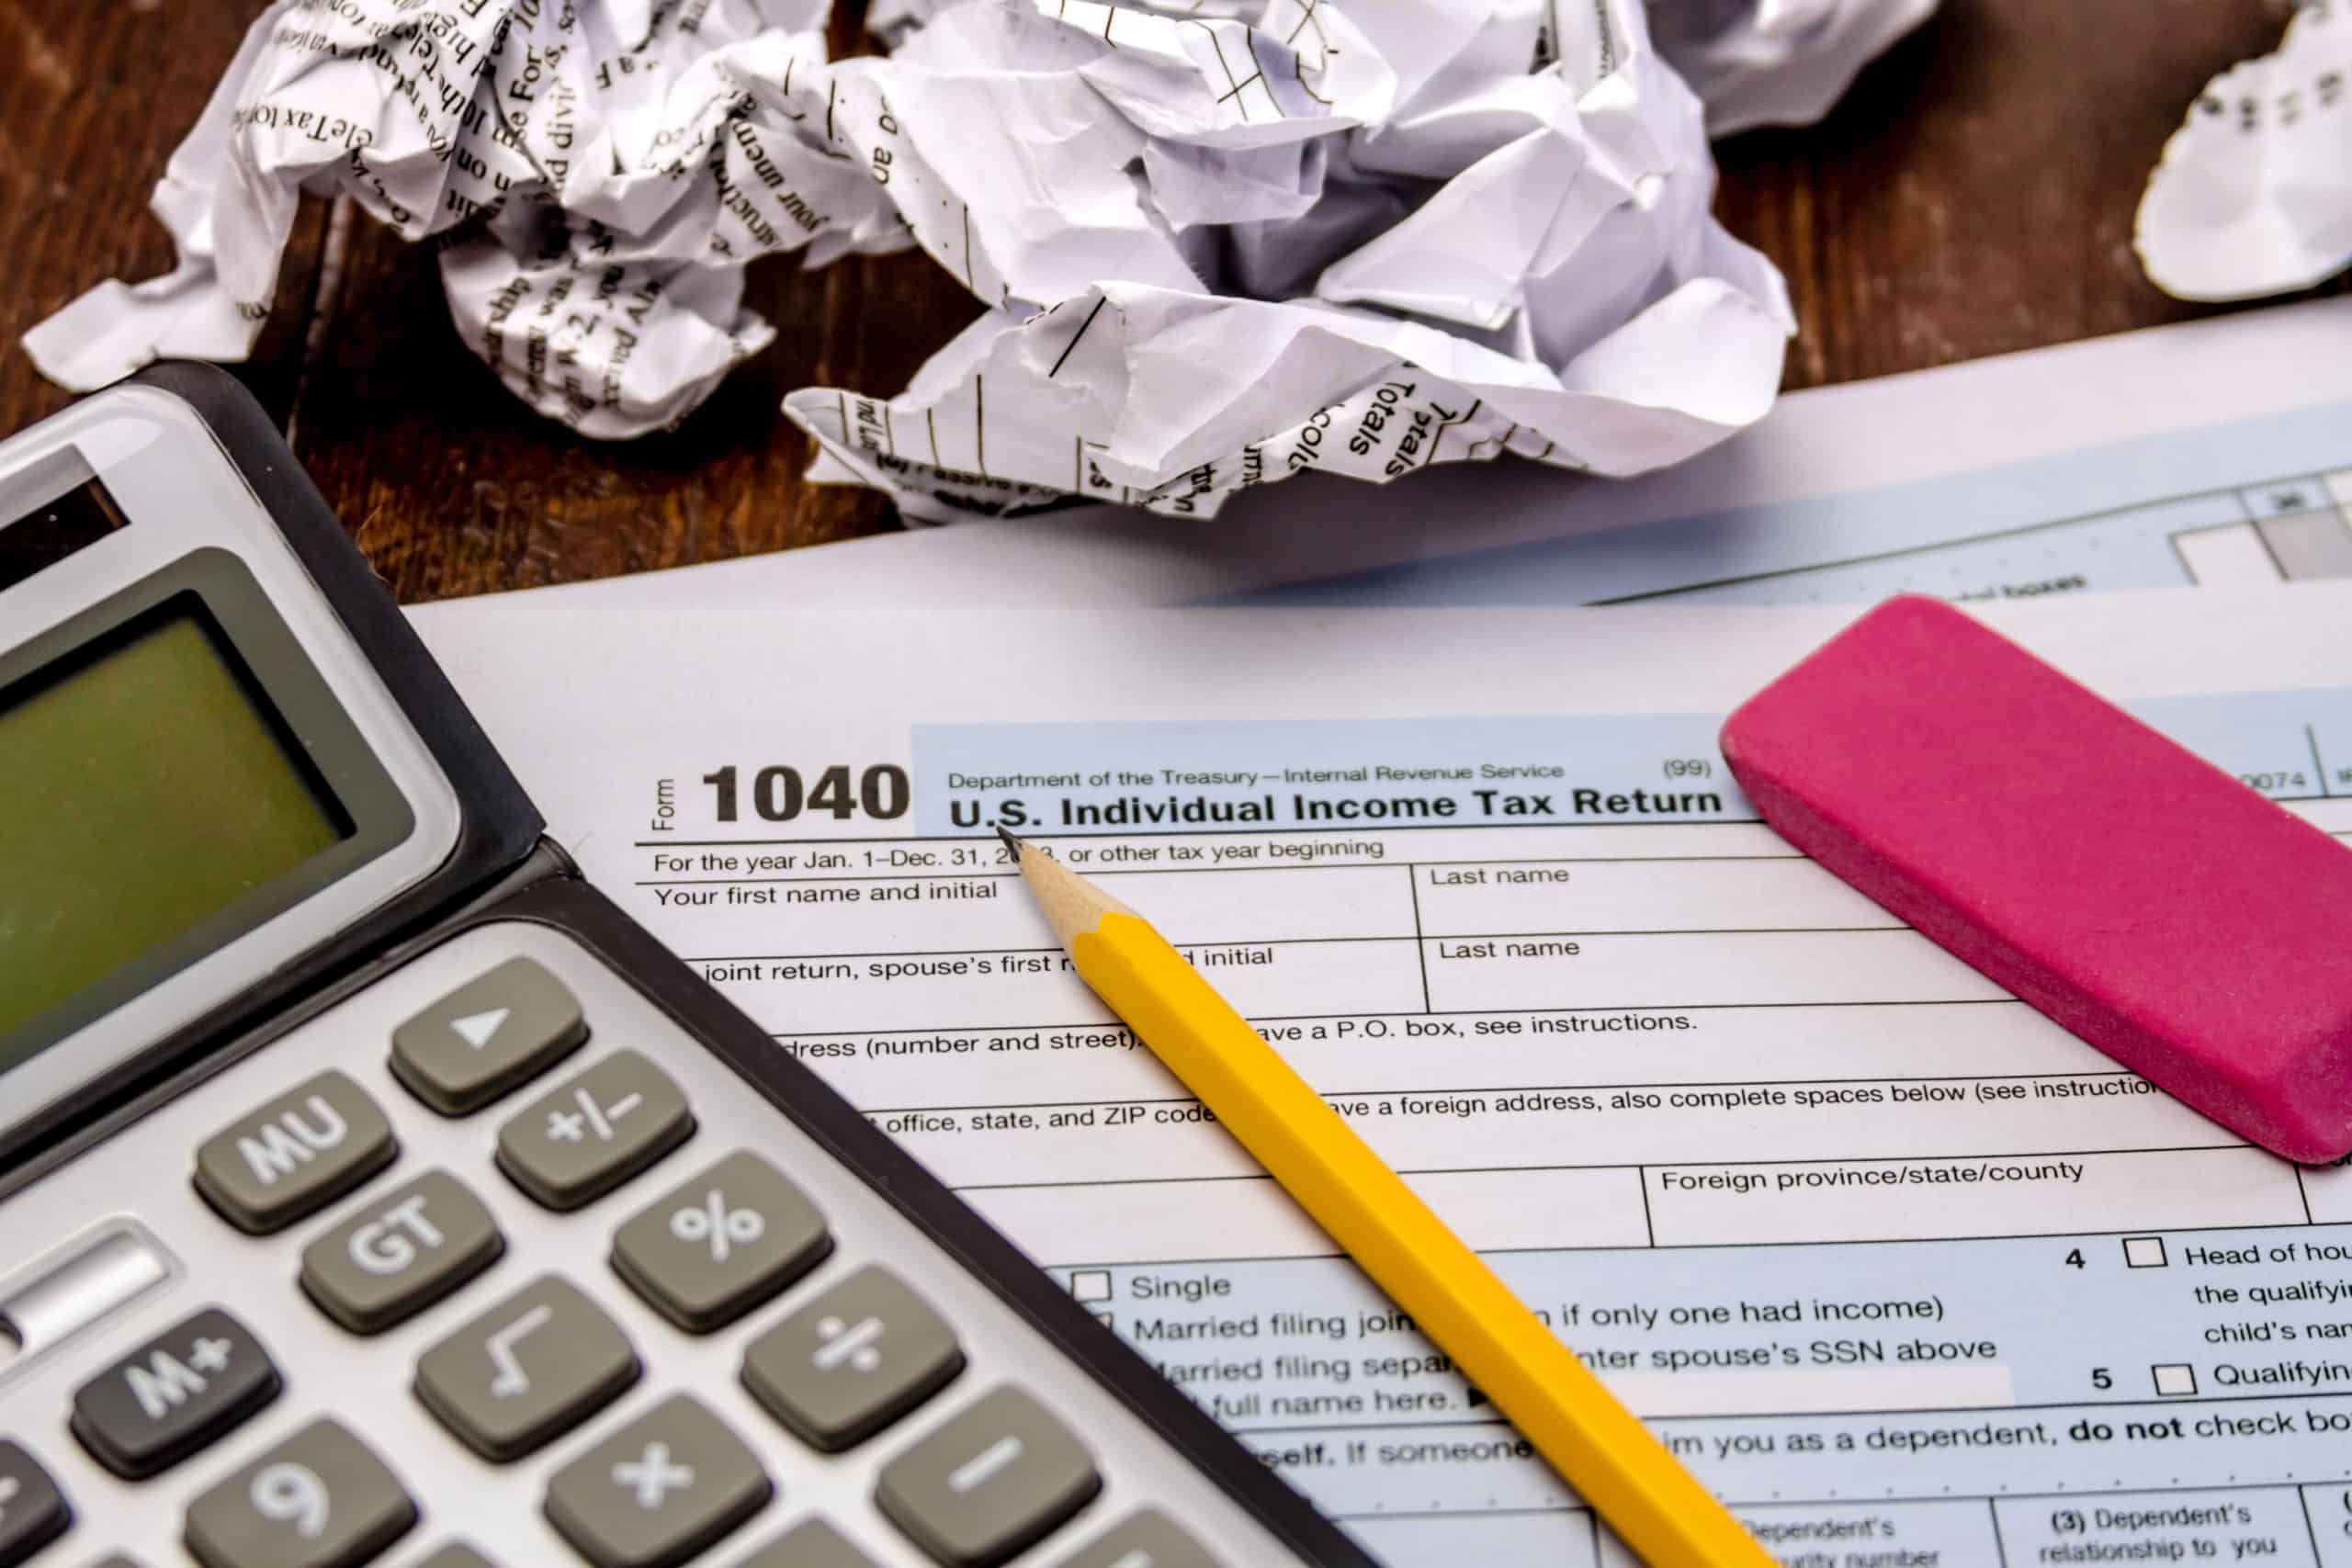 Tax form 1040 with crumpled-up forms, calculator, pink eraser, and pencil